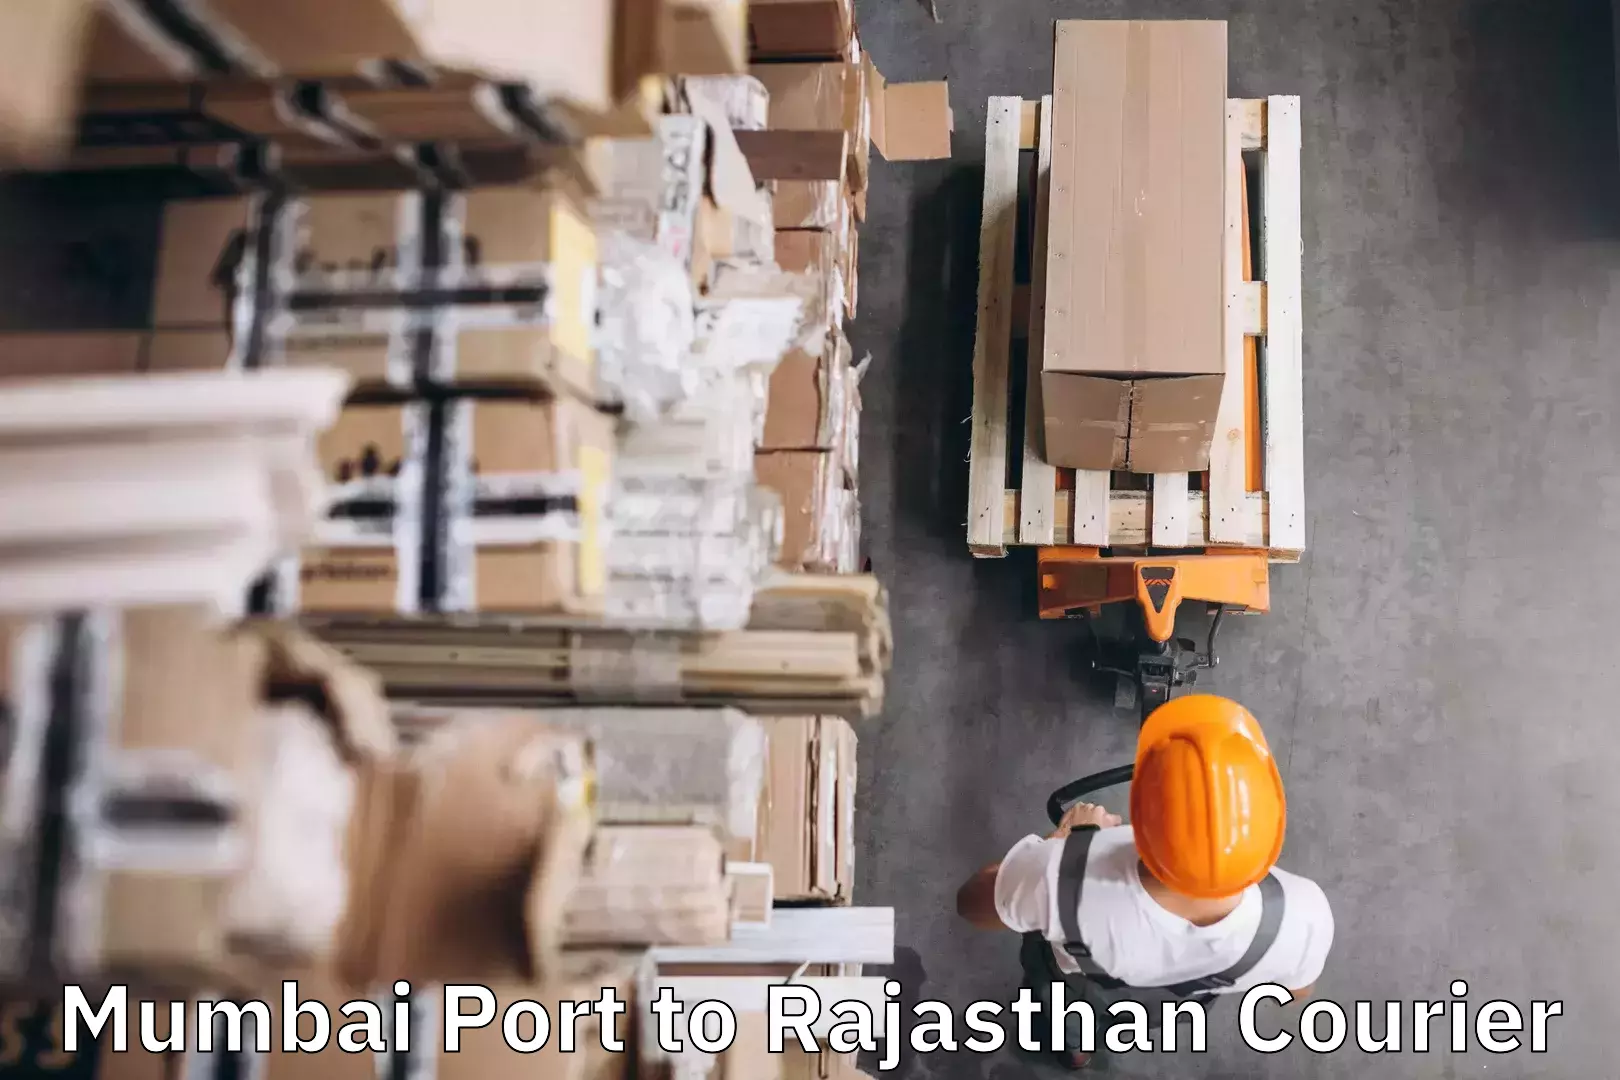 Luggage delivery network Mumbai Port to Udaipur